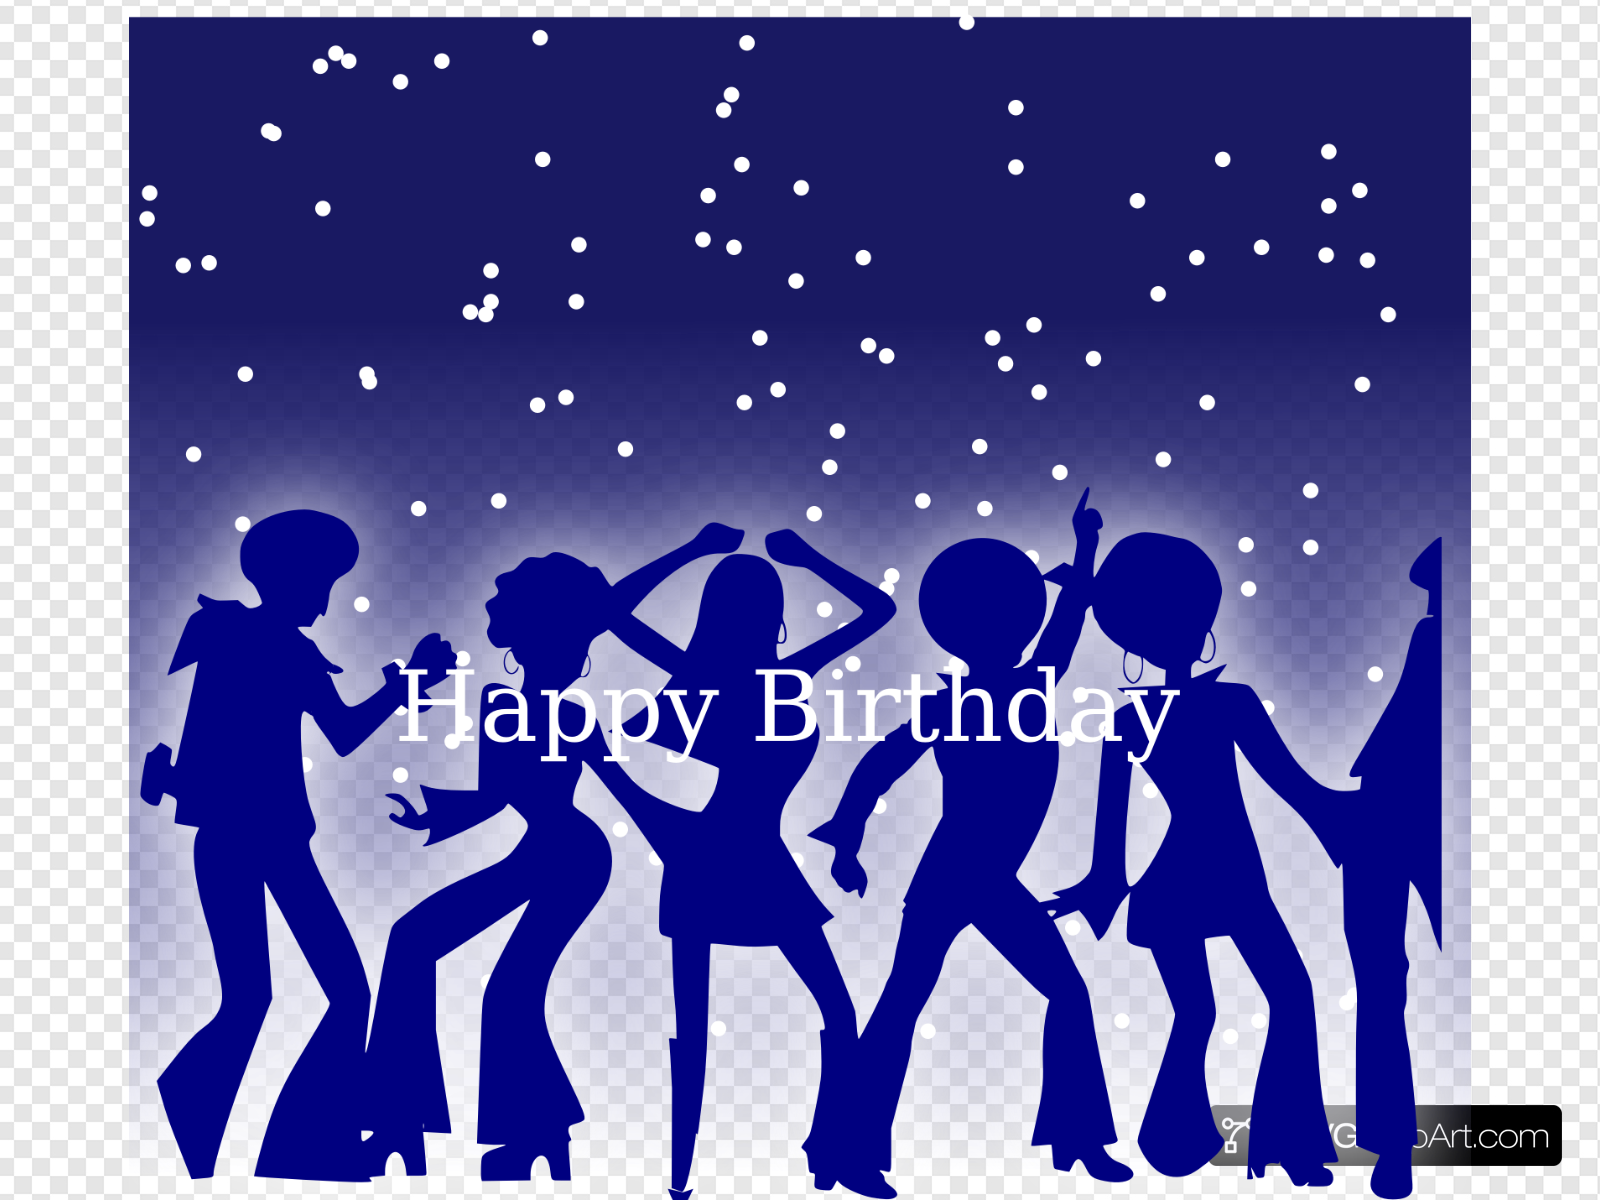 70s Birthday Clip art, Icon and SVG.